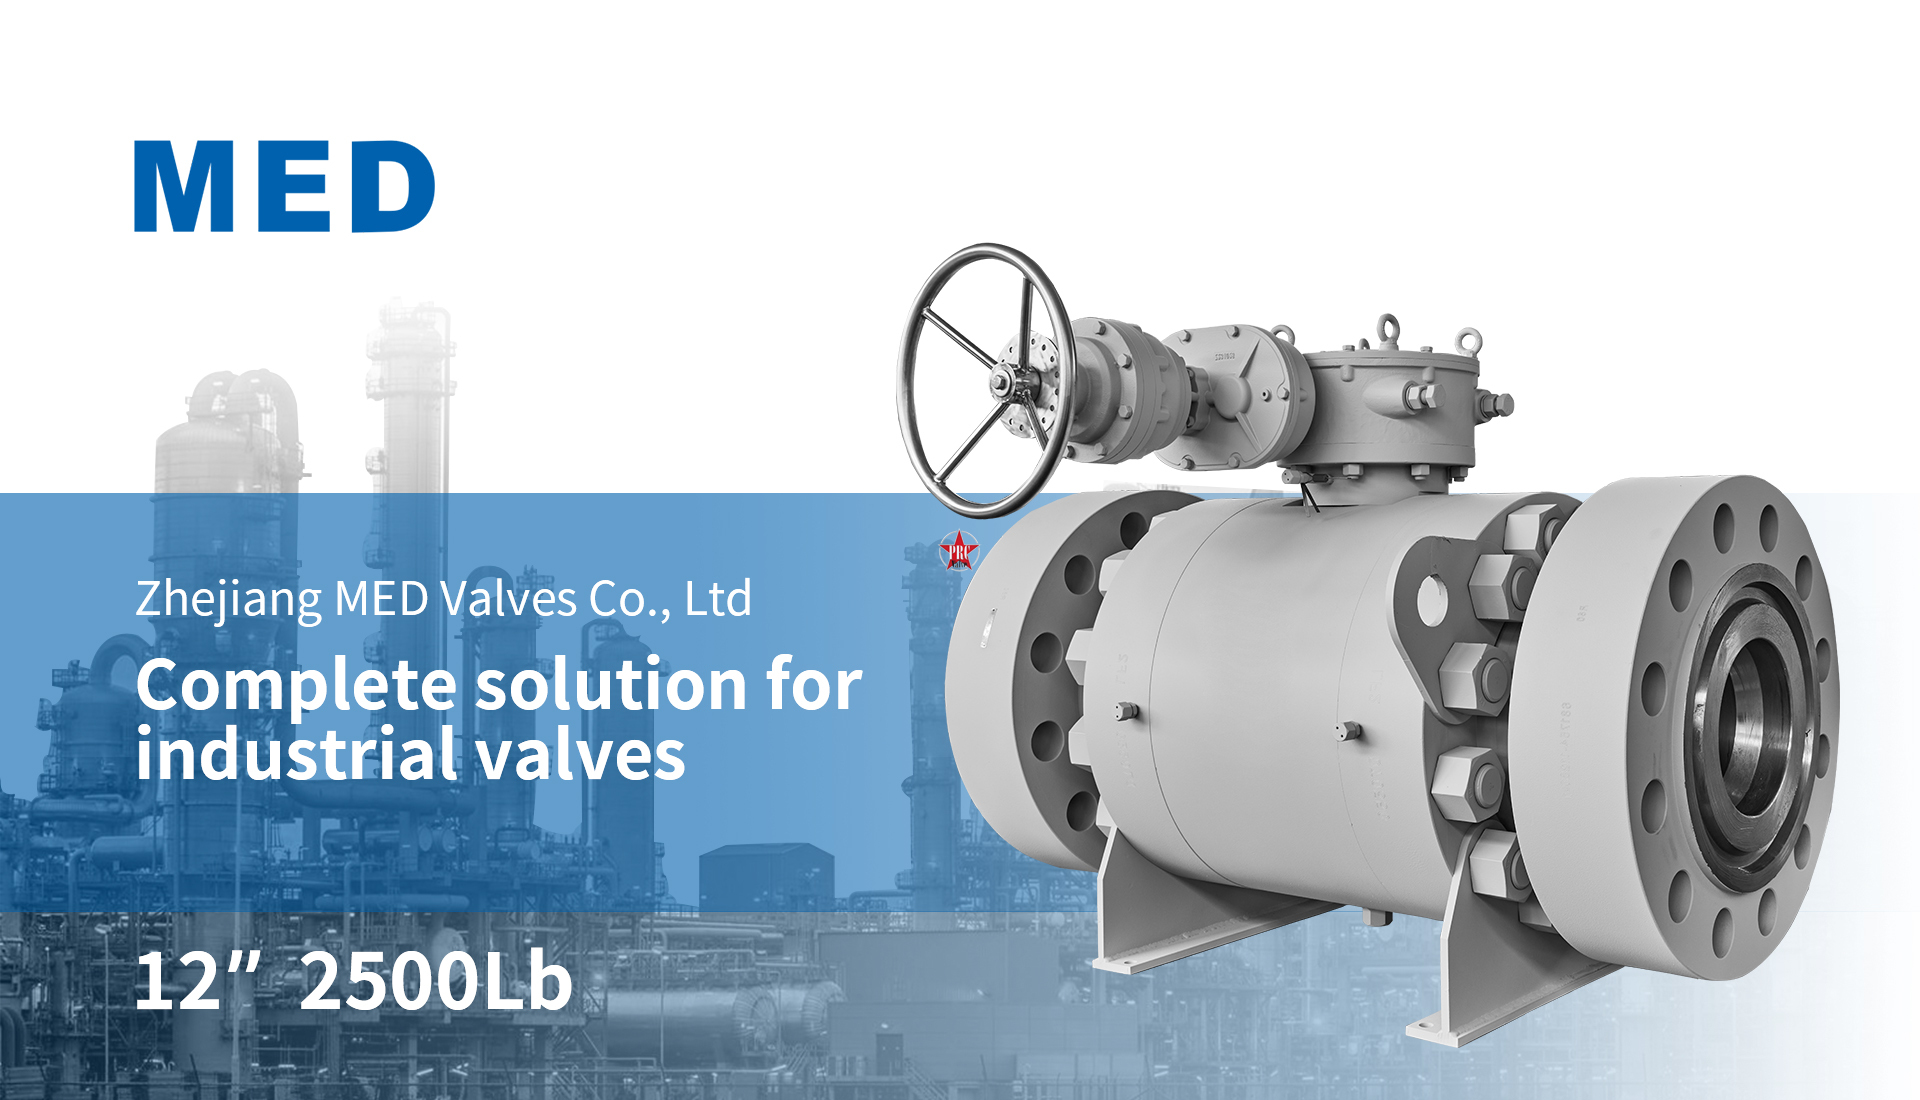 MED Valve: a professional manufacturer of industrial valves, working together to create brilliance in the number of valves